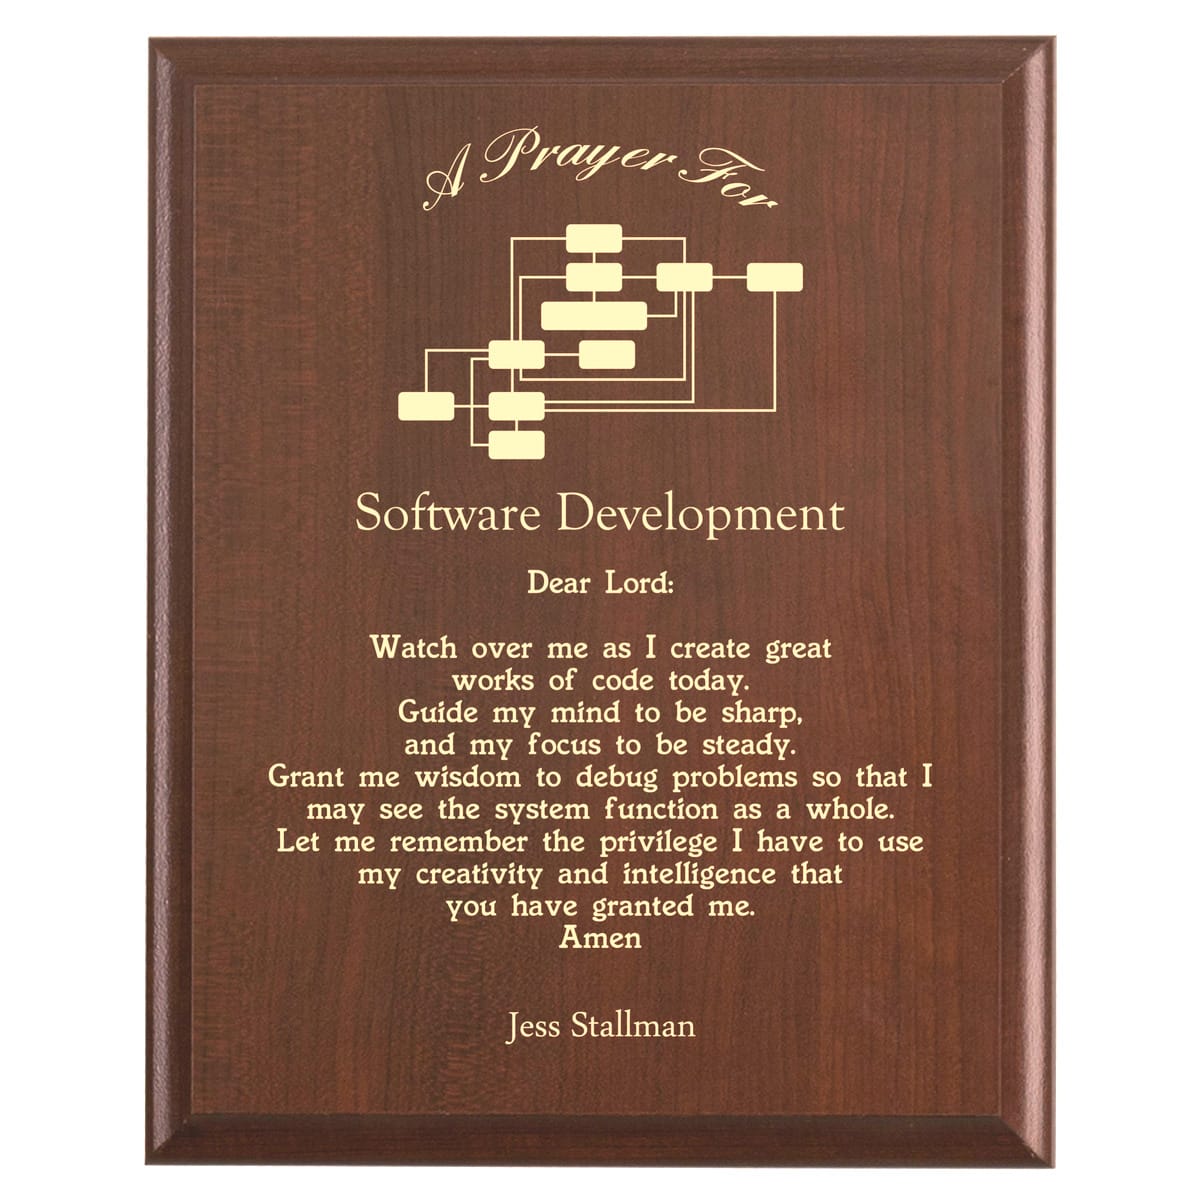 Plaque photo: Computer Programmer Prayer Plaque design with free personalization. Wood style finish with customized text.